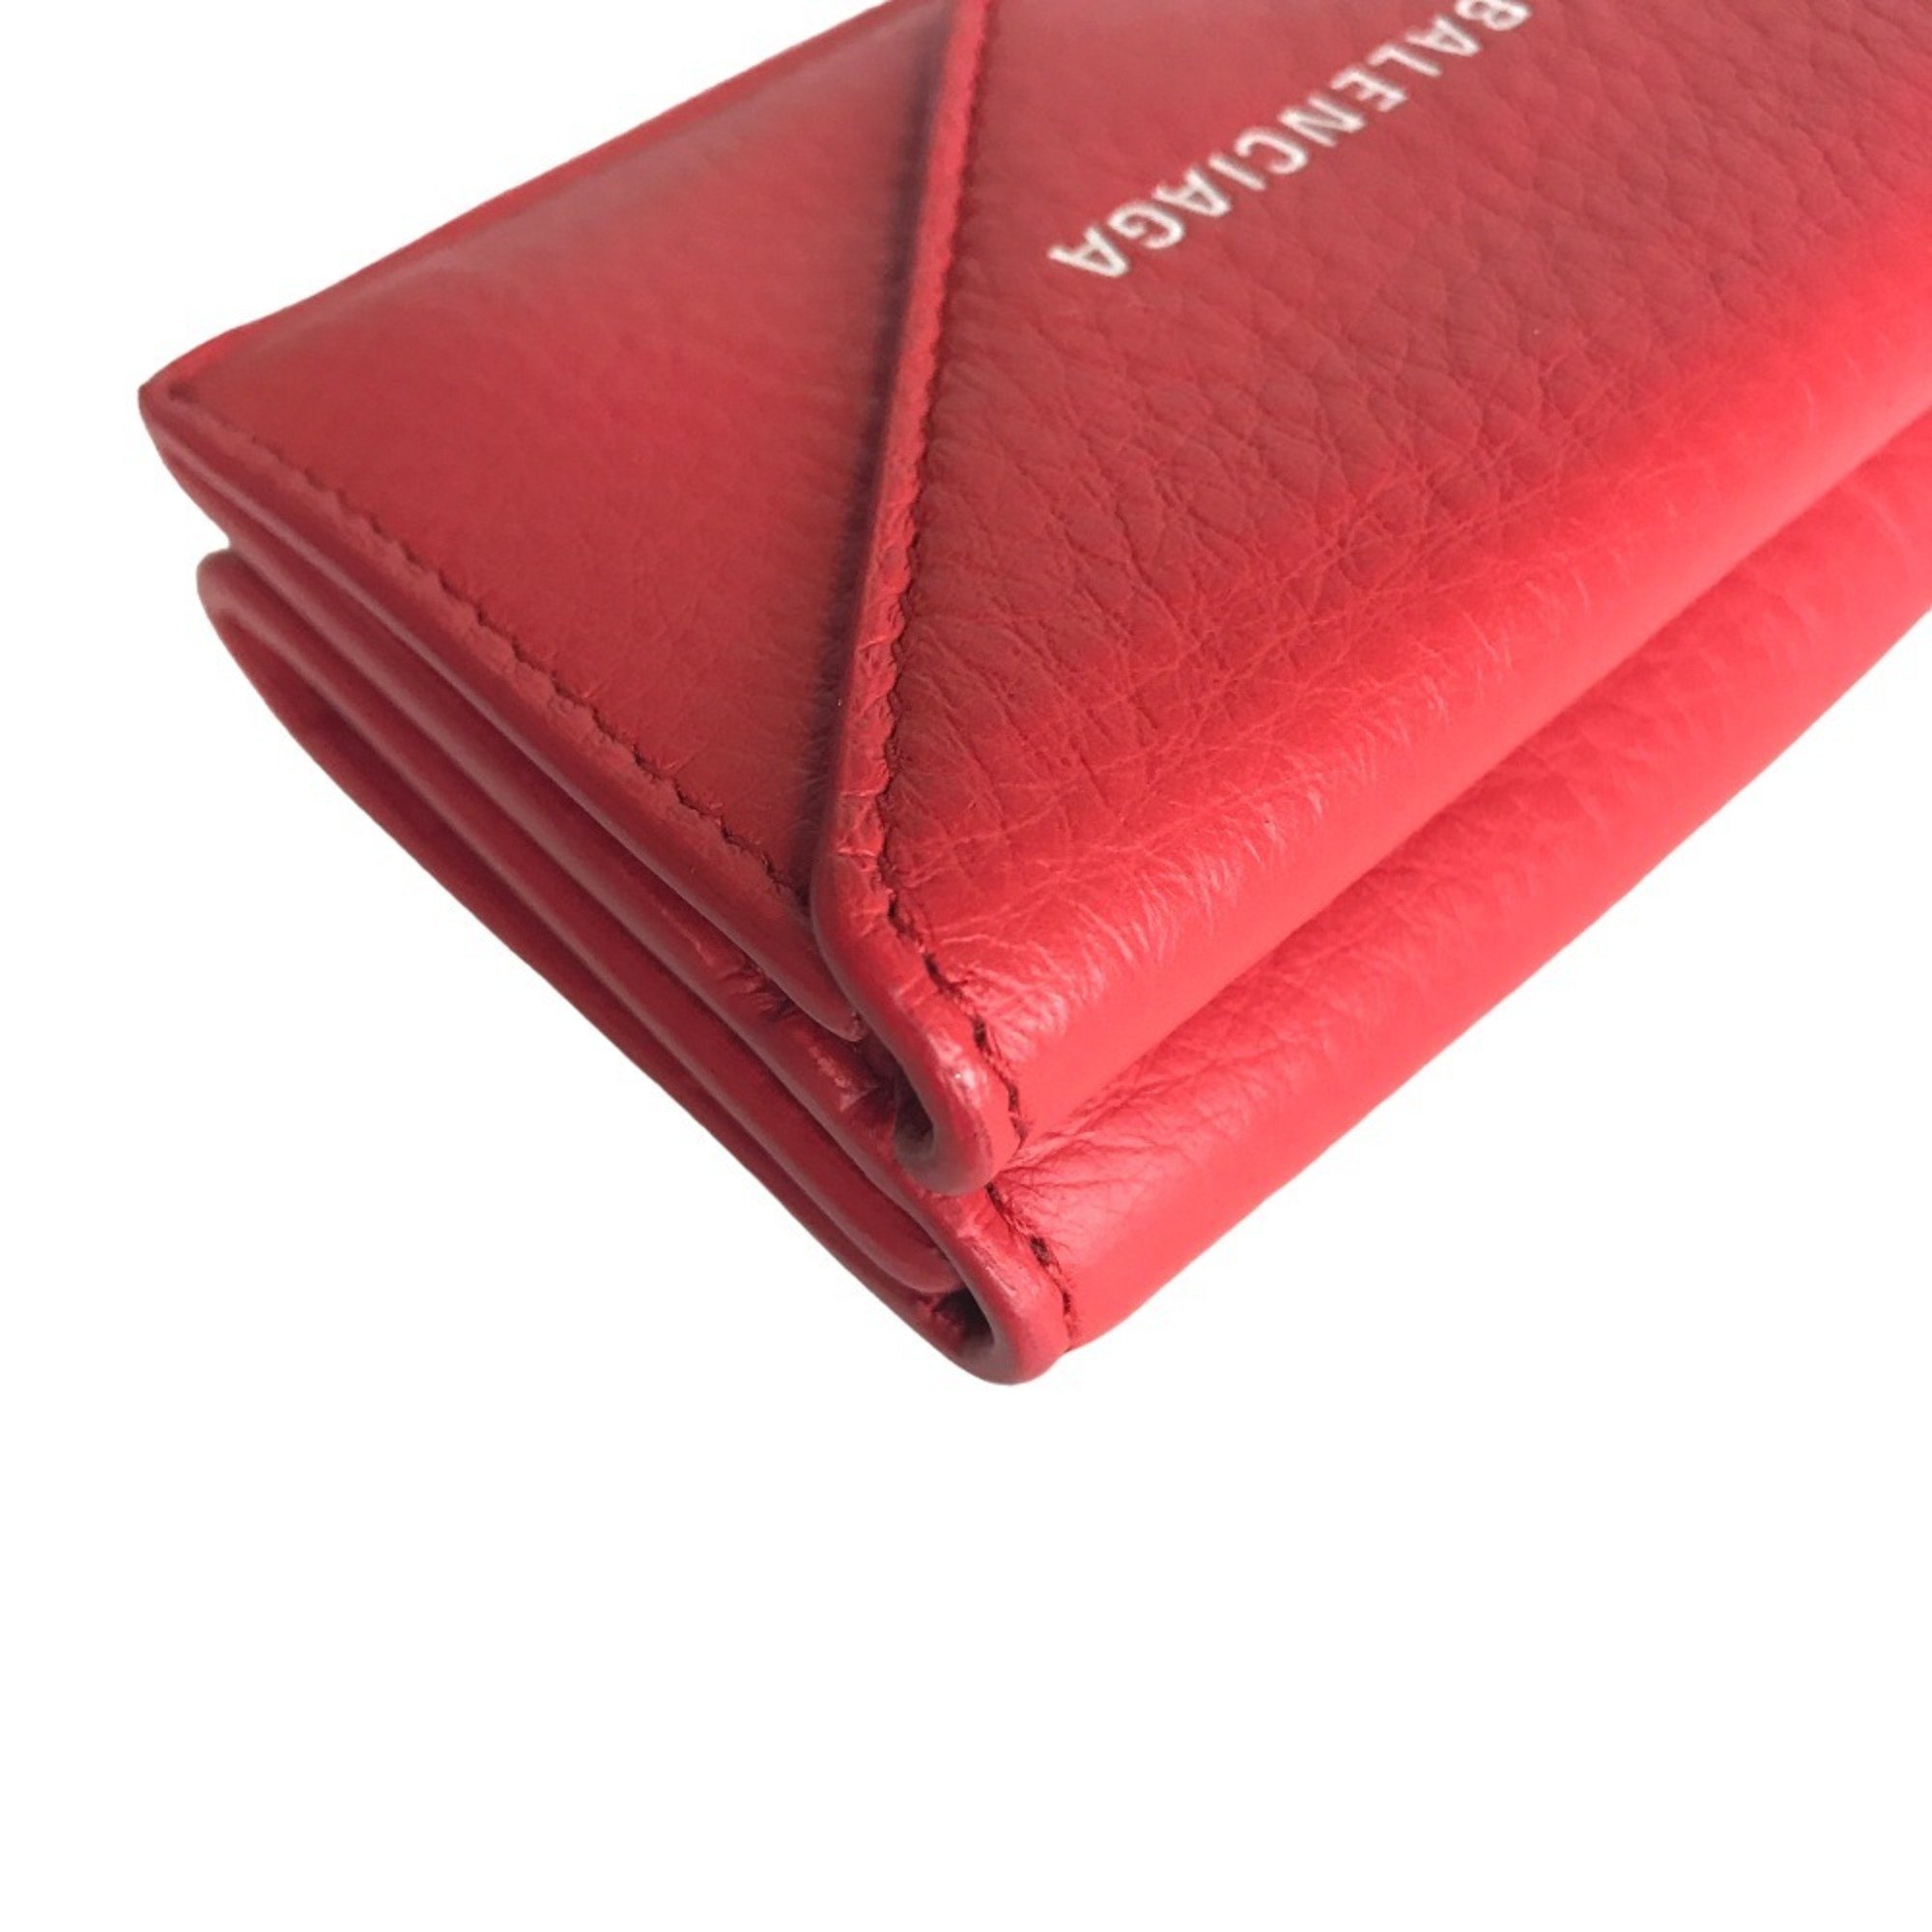 BALENCIAGA Paper Compact Wallet Tri-fold for Women Leather Red 3914446 6524 W 56814